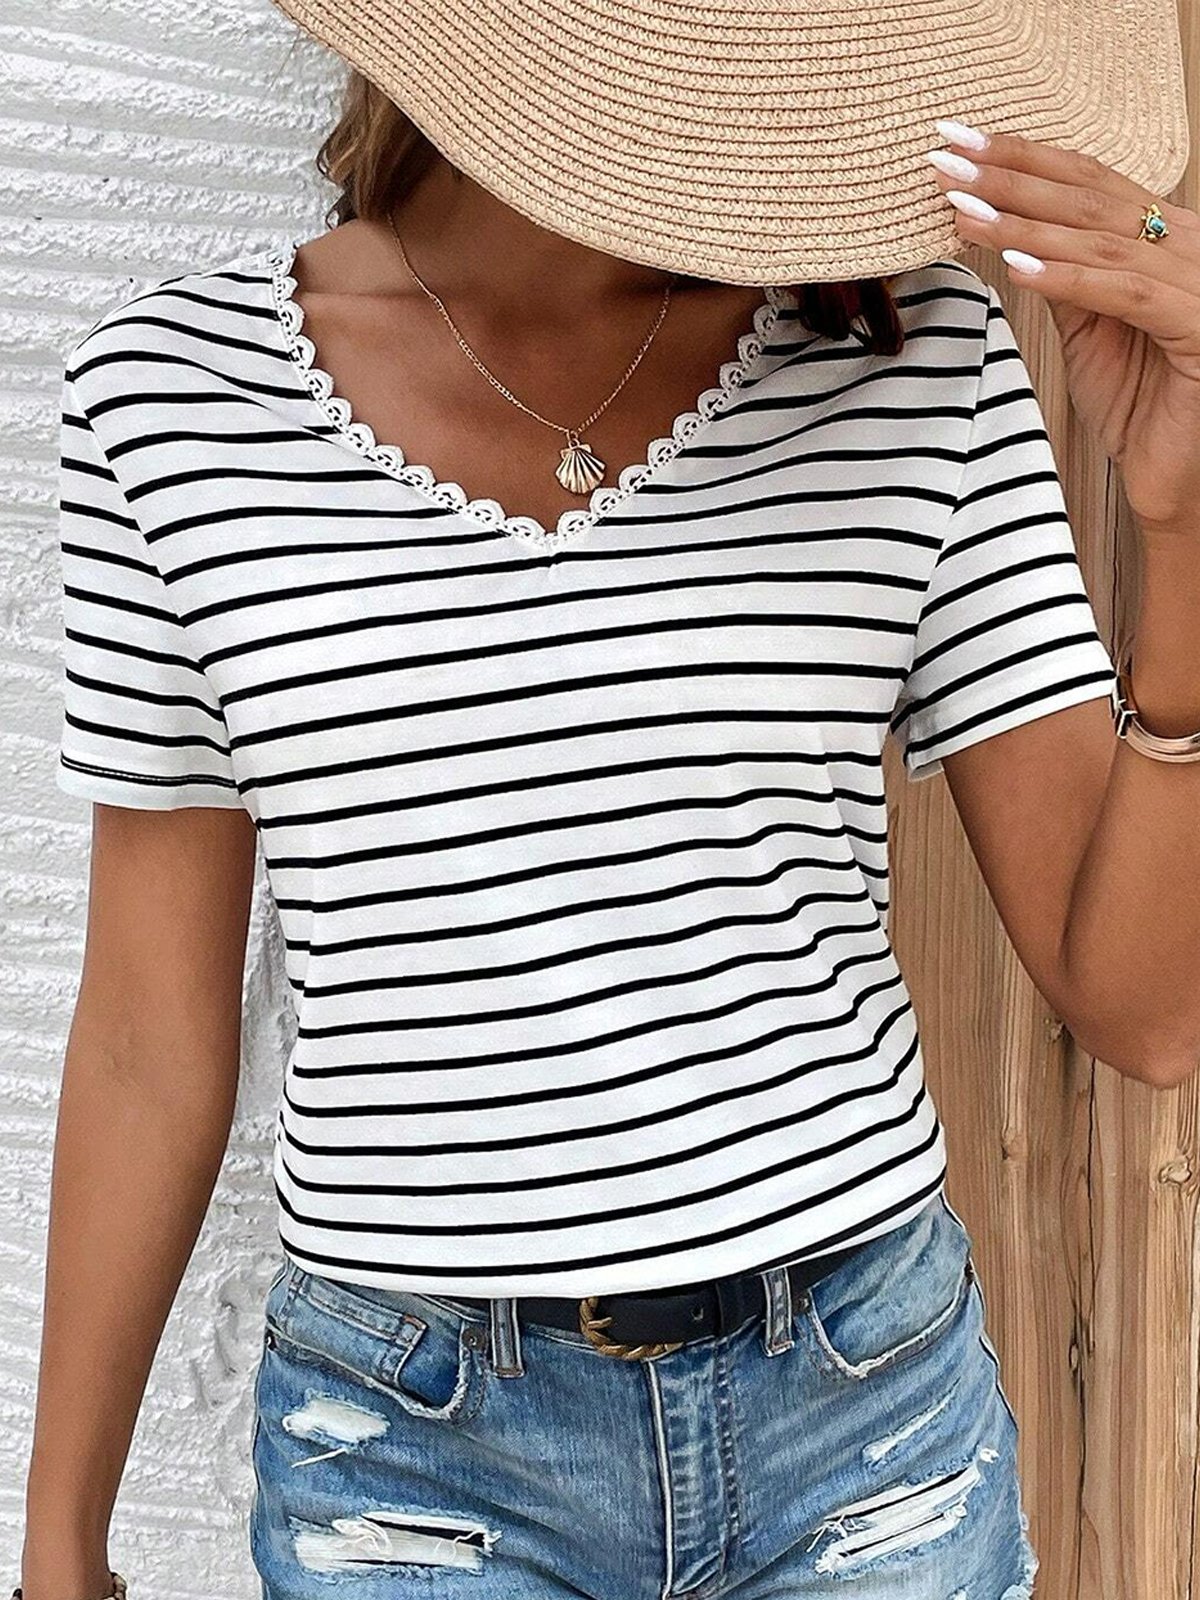 Women's Short Sleeve Tee Summer Striped Lace Hollow out V Neck Going Out Elegant Top White Red